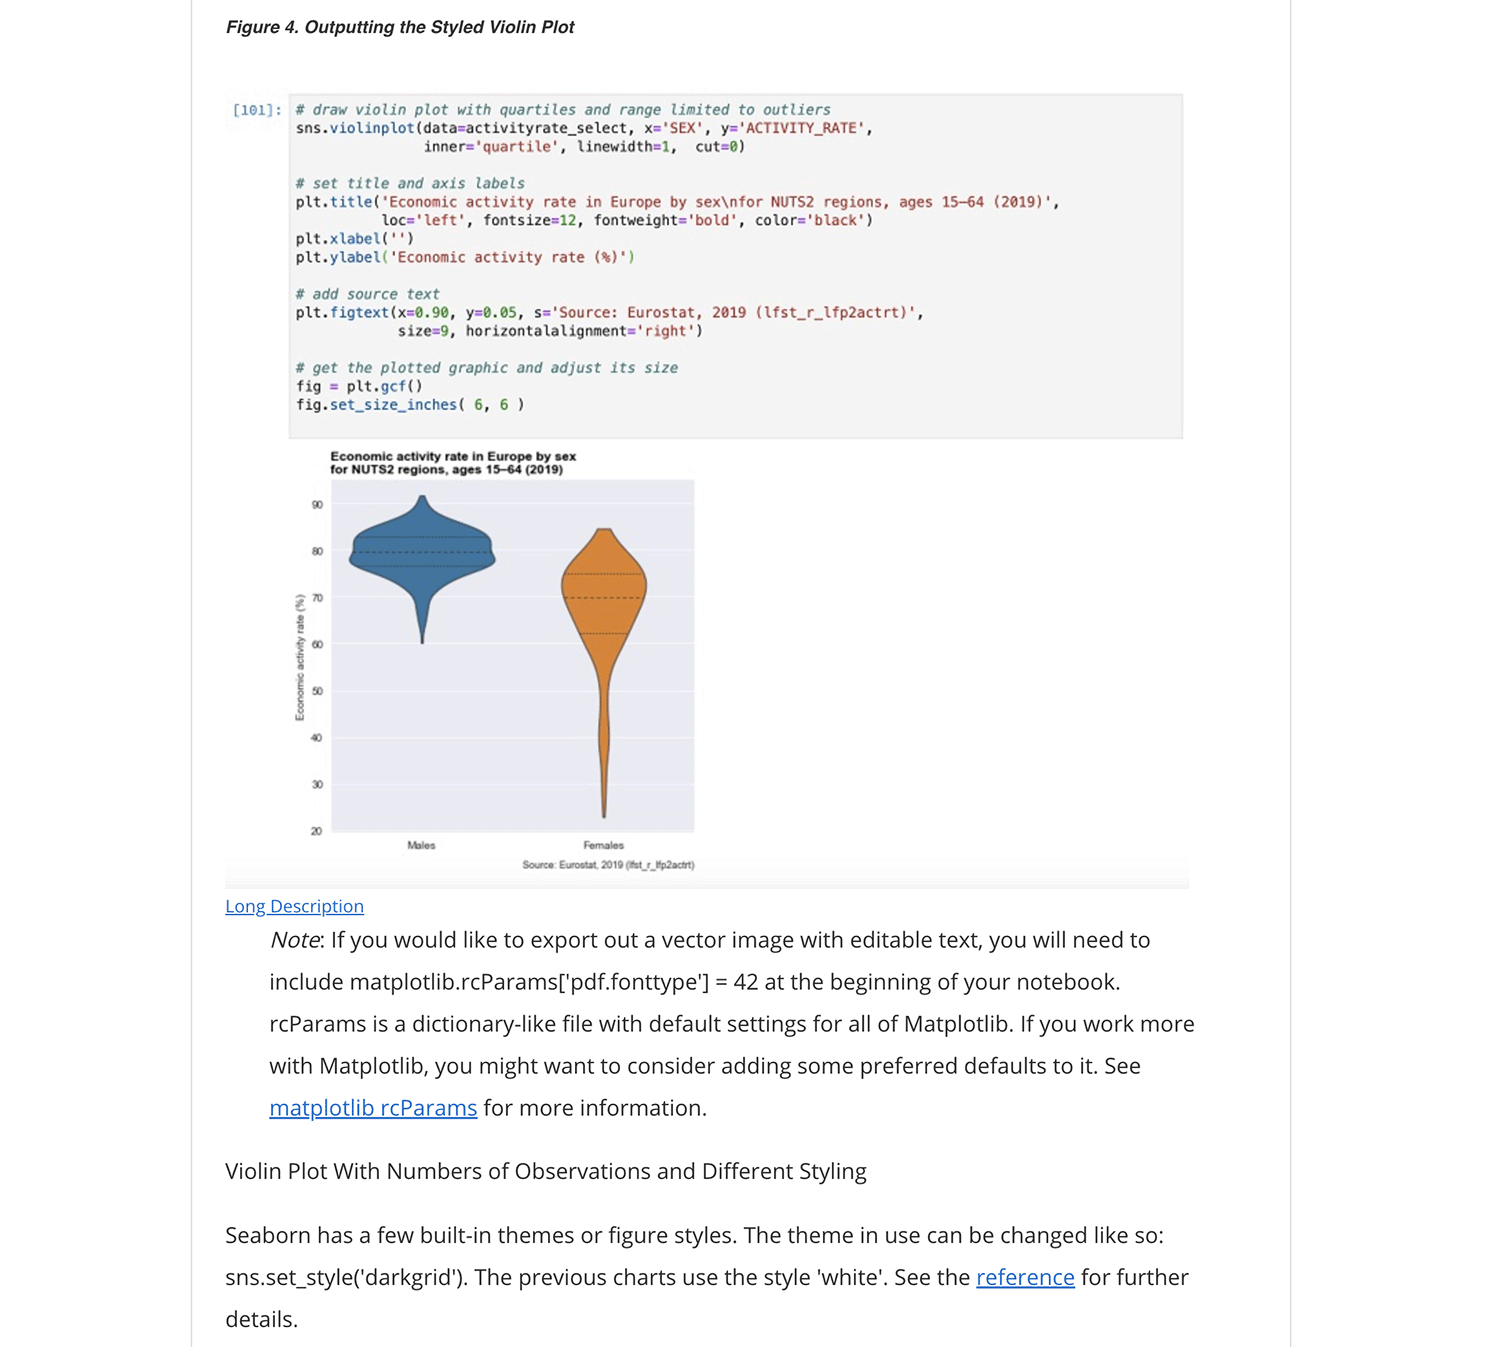 Screenshot of How-to guide showing violin plot and code to render it in JupyterLab plus explanatory text.